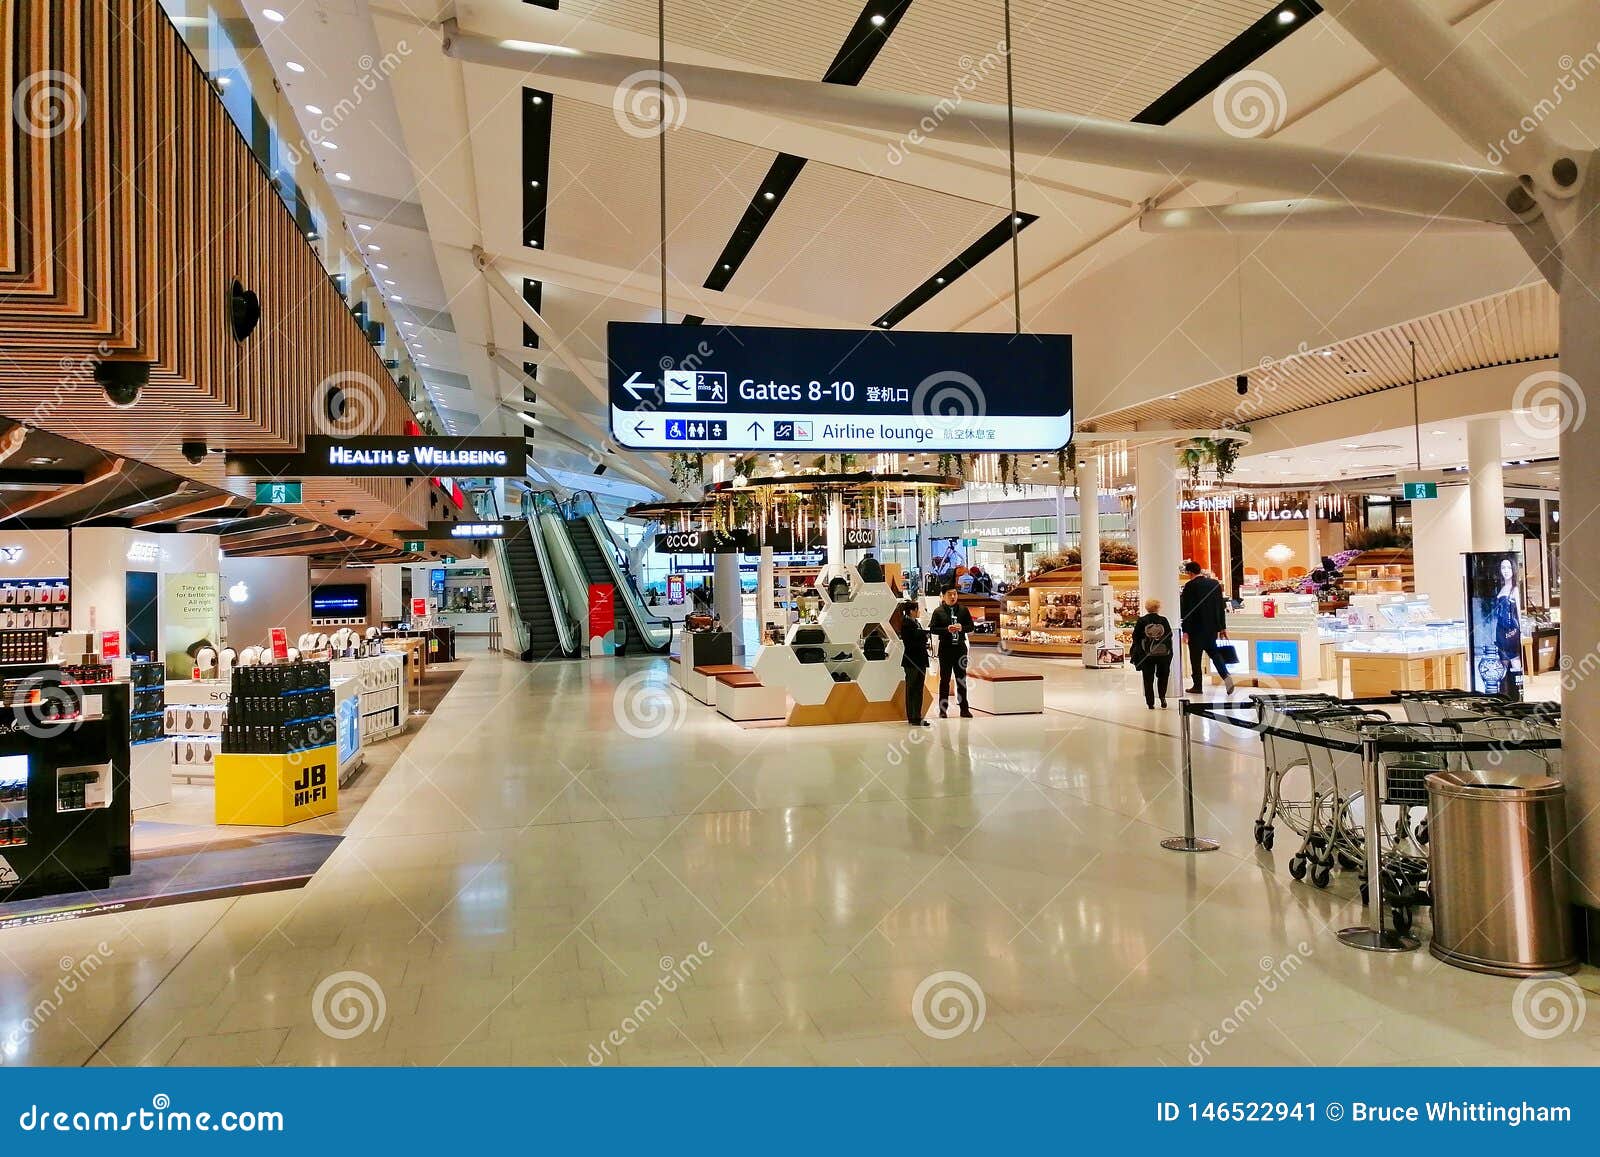 Shopping at Sydney Airport Domestic Terminals